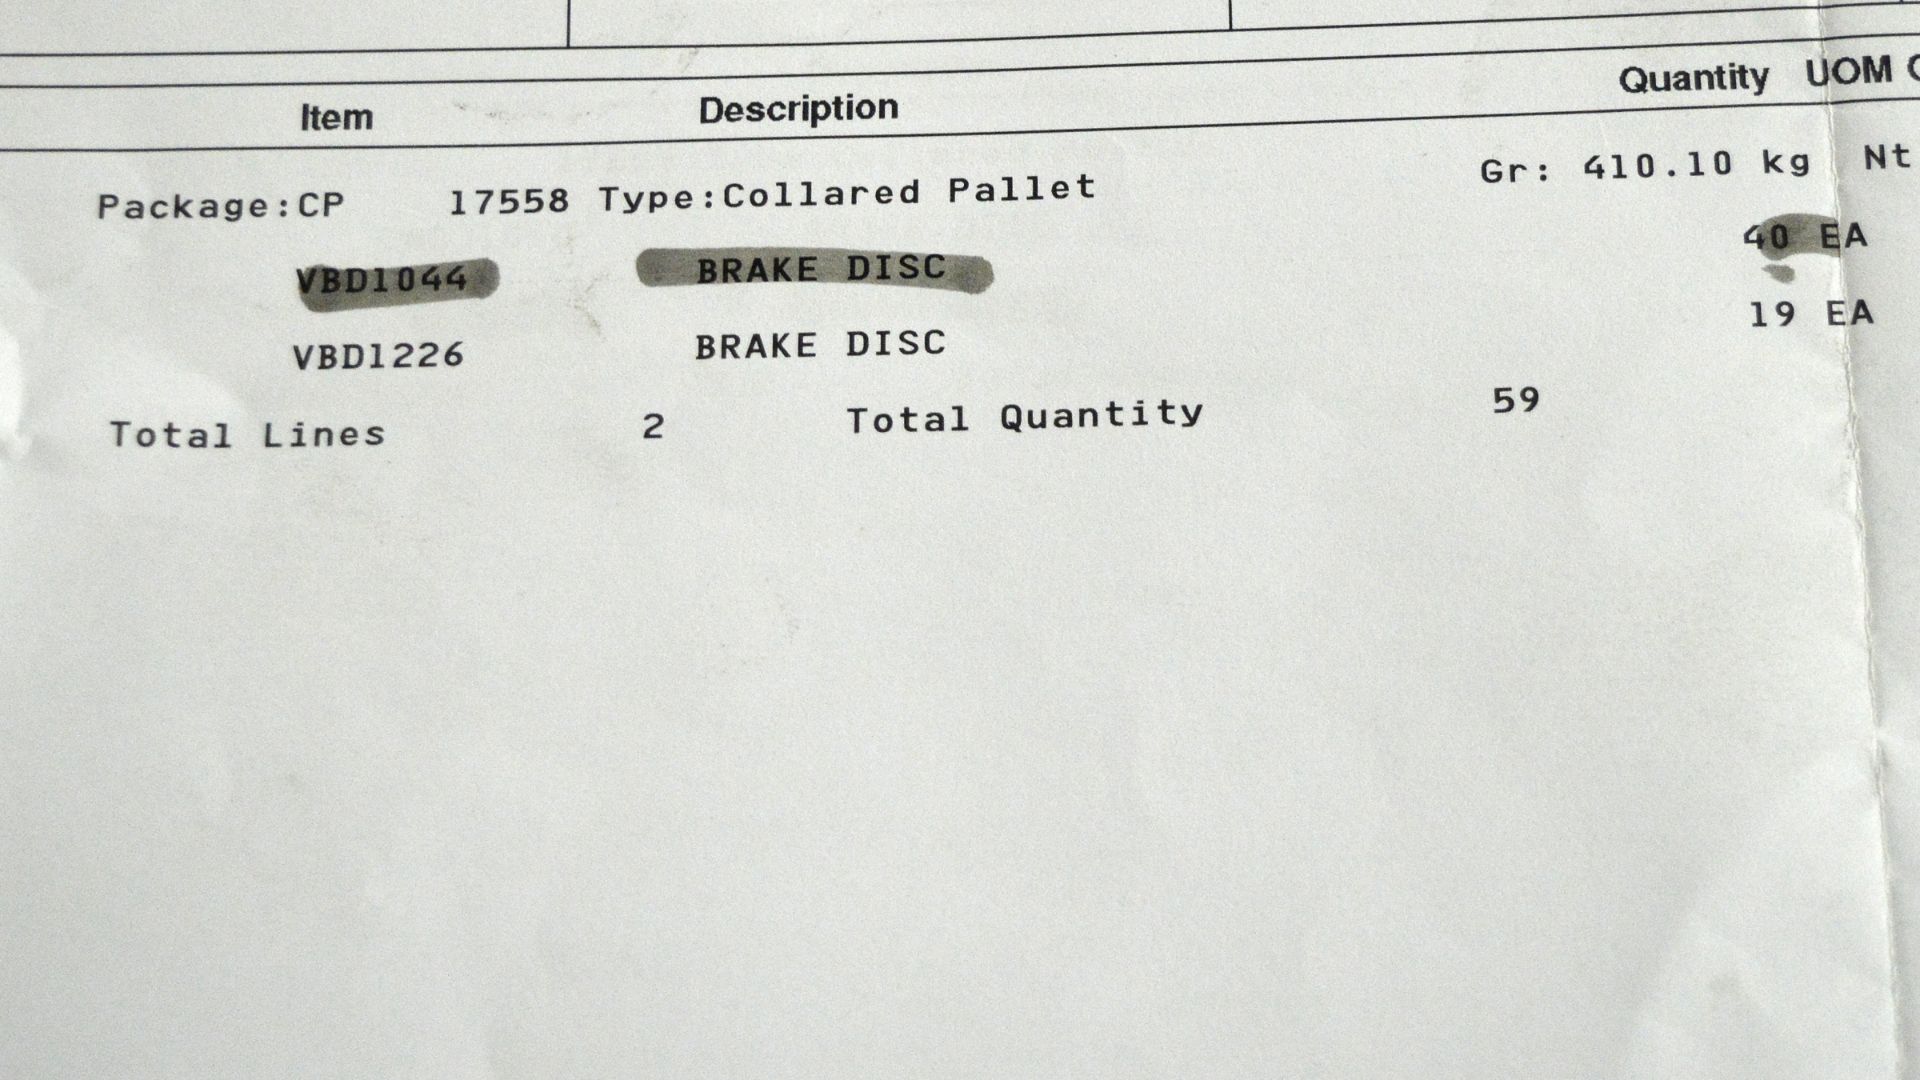 Vehicle parts - Multipart brake discs VDB 1044, VDB 1226 - see picture for itinerary for m - Image 4 of 5